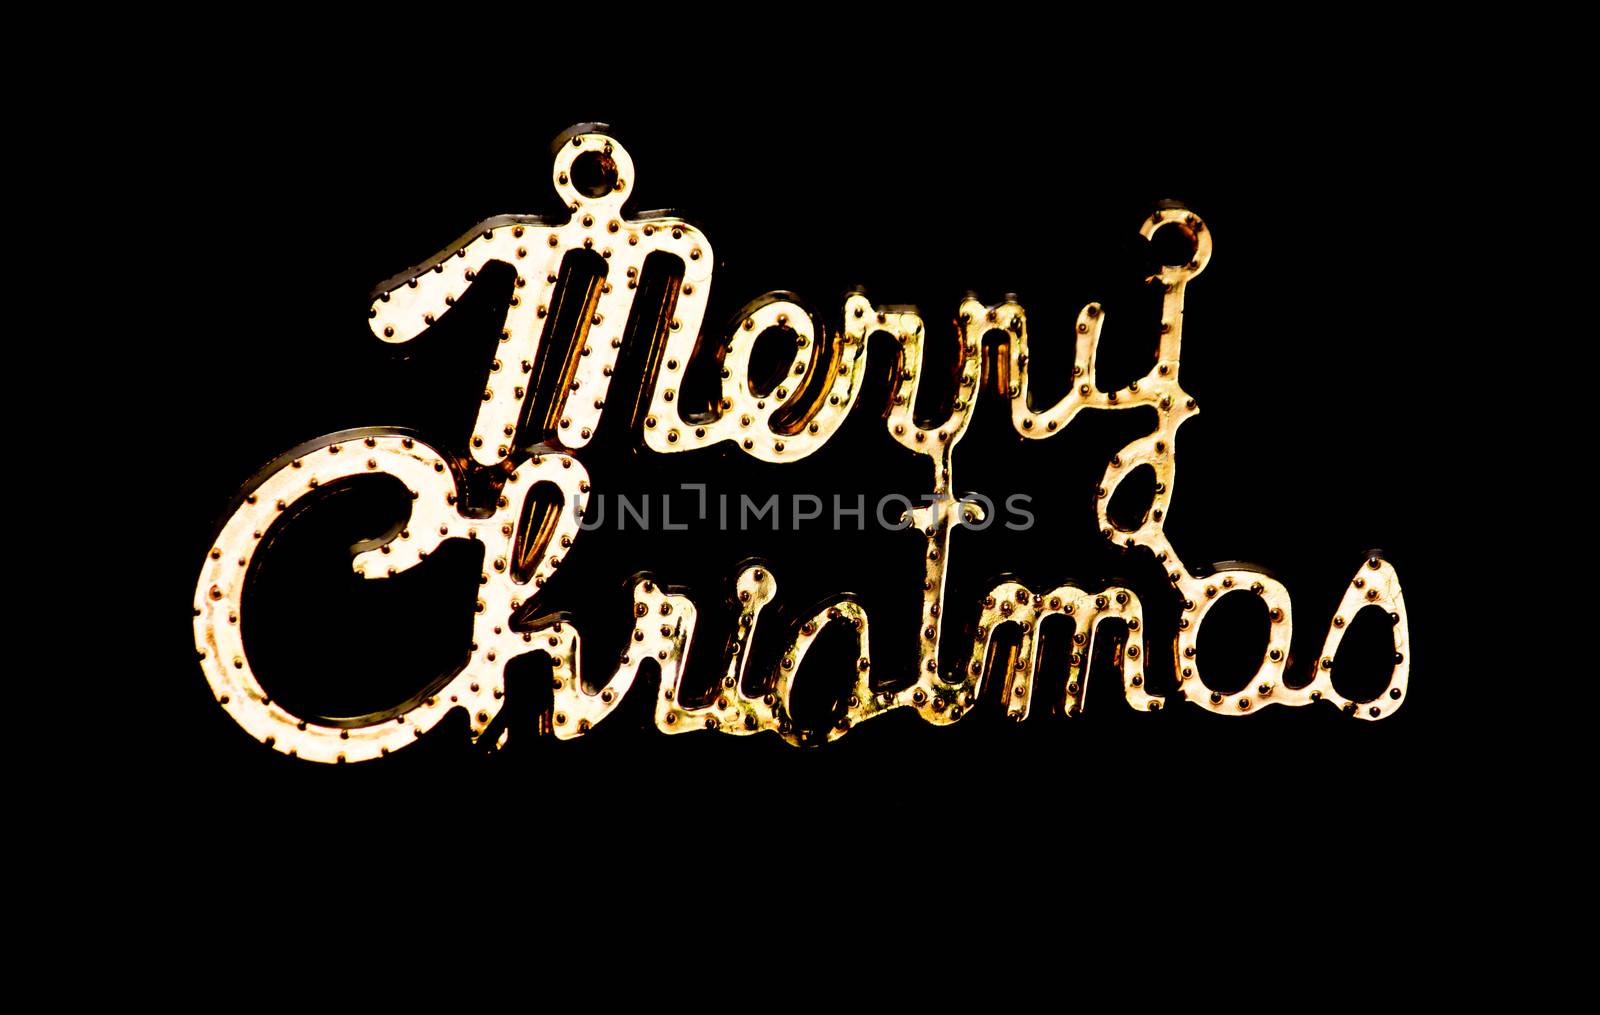 Merry Christmas on dark background with lights bokeh sparkle bac by TEERASAK